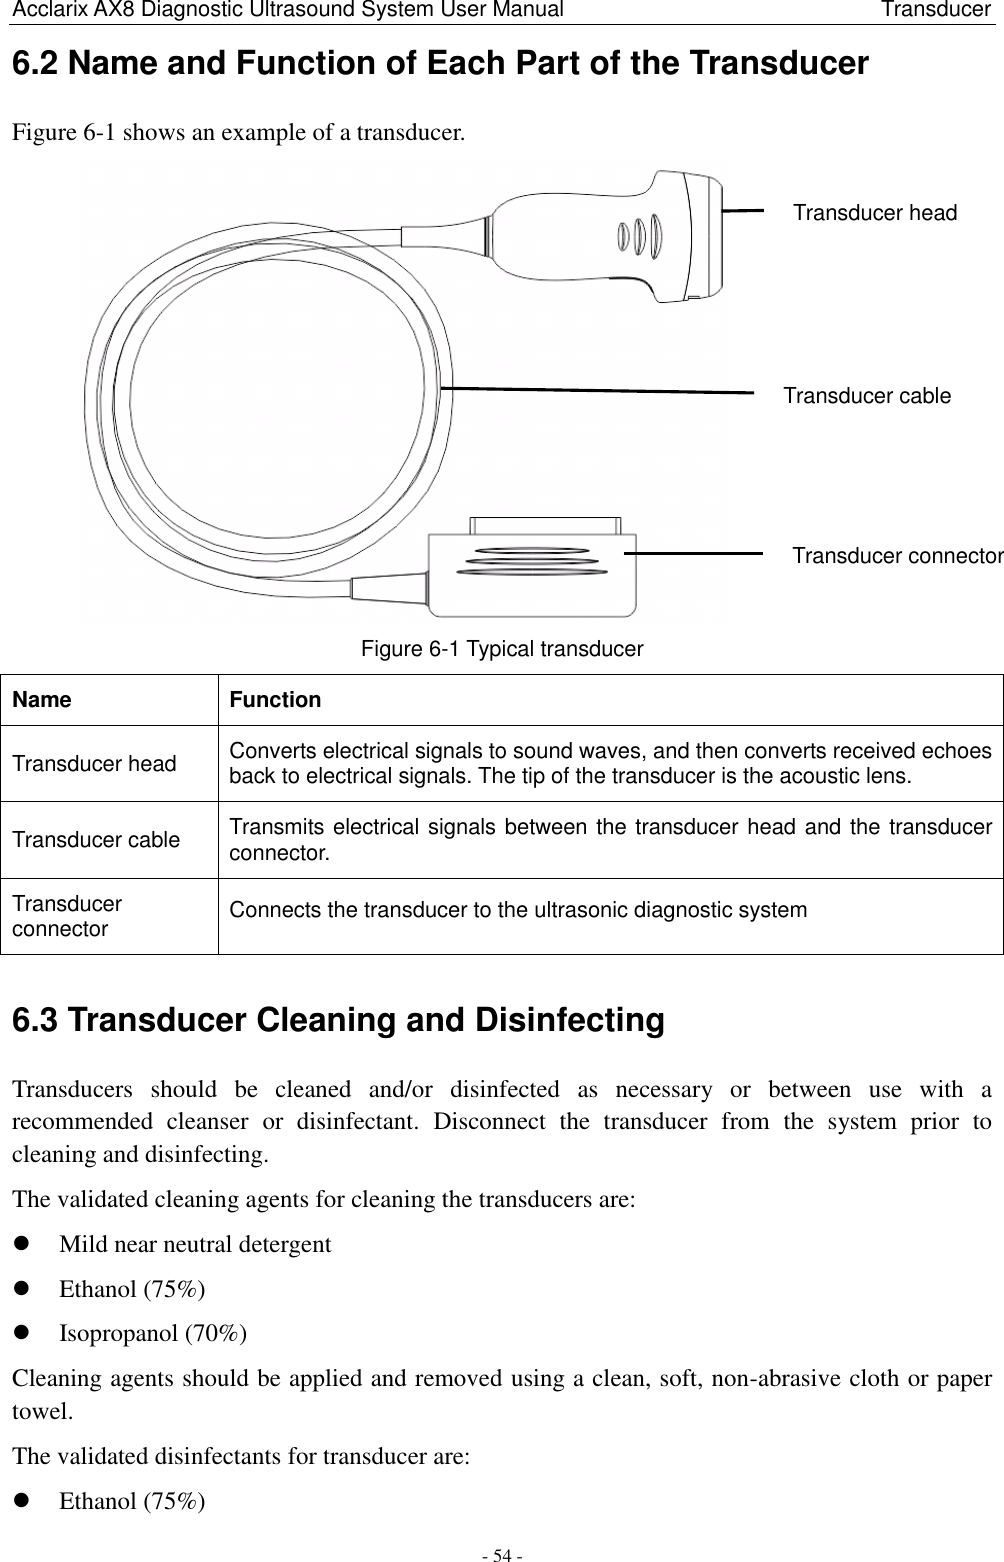 Acclarix AX8 Diagnostic Ultrasound System User Manual                                                          Transducer - 54 - 6.2 Name and Function of Each Part of the Transducer Figure 6-1 shows an example of a transducer.  Figure 6-1 Typical transducer Name   Function Transducer head Converts electrical signals to sound waves, and then converts received echoes back to electrical signals. The tip of the transducer is the acoustic lens.   Transducer cable Transmits electrical signals between the transducer head and the transducer connector. Transducer connector Connects the transducer to the ultrasonic diagnostic system  6.3 Transducer Cleaning and Disinfecting Transducers  should  be  cleaned  and/or  disinfected  as  necessary  or  between  use  with  a recommended  cleanser  or  disinfectant.  Disconnect  the  transducer  from  the  system  prior  to cleaning and disinfecting. The validated cleaning agents for cleaning the transducers are:    Mild near neutral detergent  Ethanol (75%)  Isopropanol (70%) Cleaning agents should be applied and removed using a clean, soft, non-abrasive cloth or paper towel.   The validated disinfectants for transducer are:  Ethanol (75%) Transducer head Transducer connector Transducer cable  